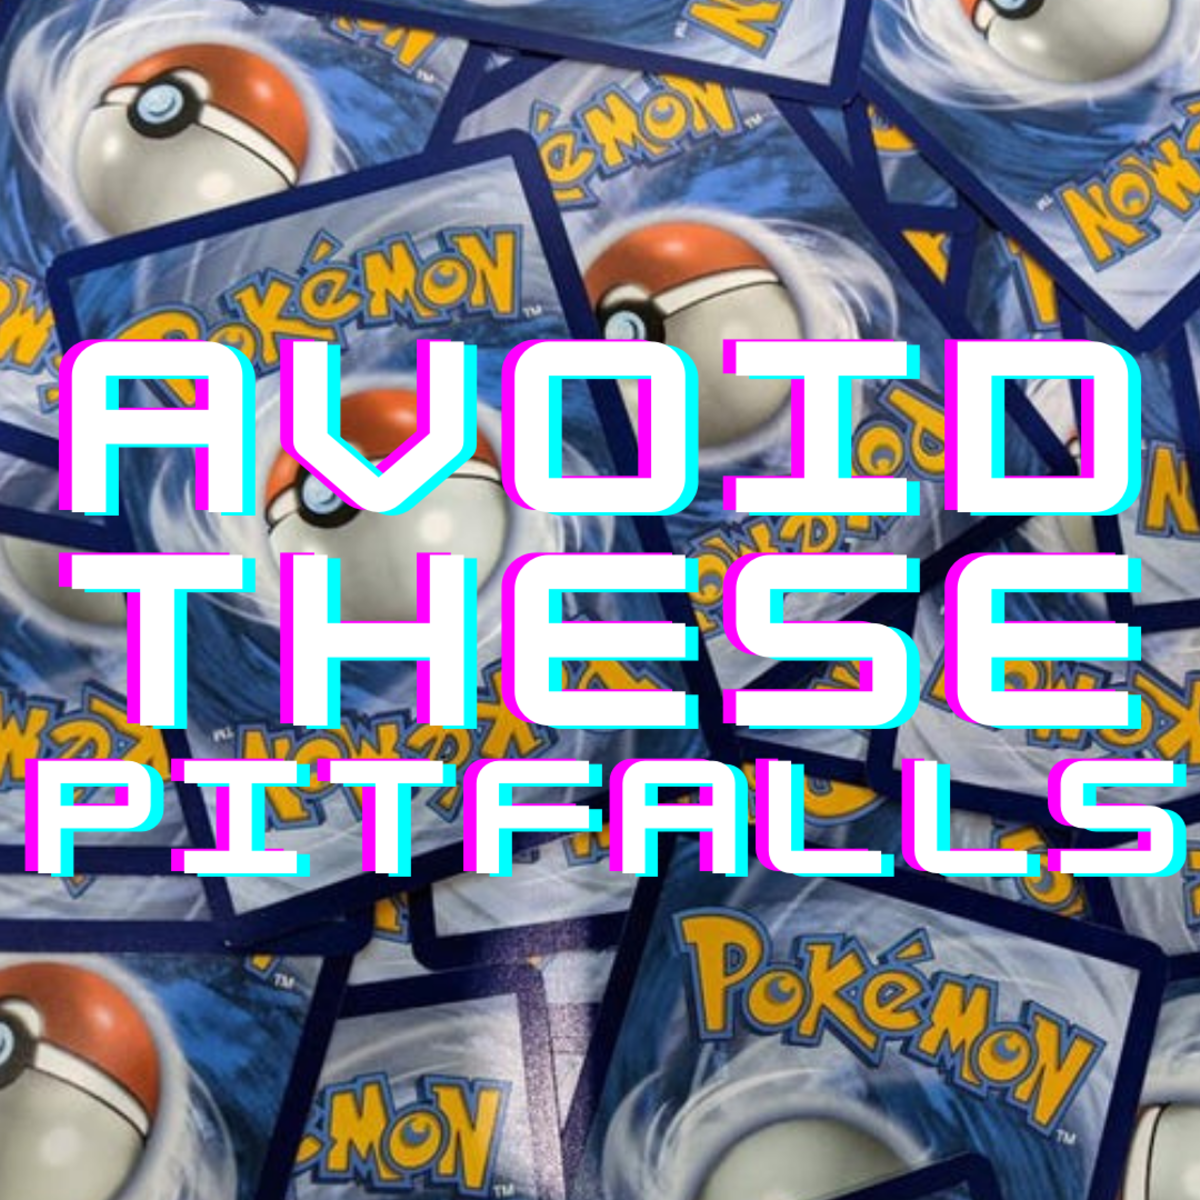 3 Things You Should Avoid When Investing in Pokémon Cards